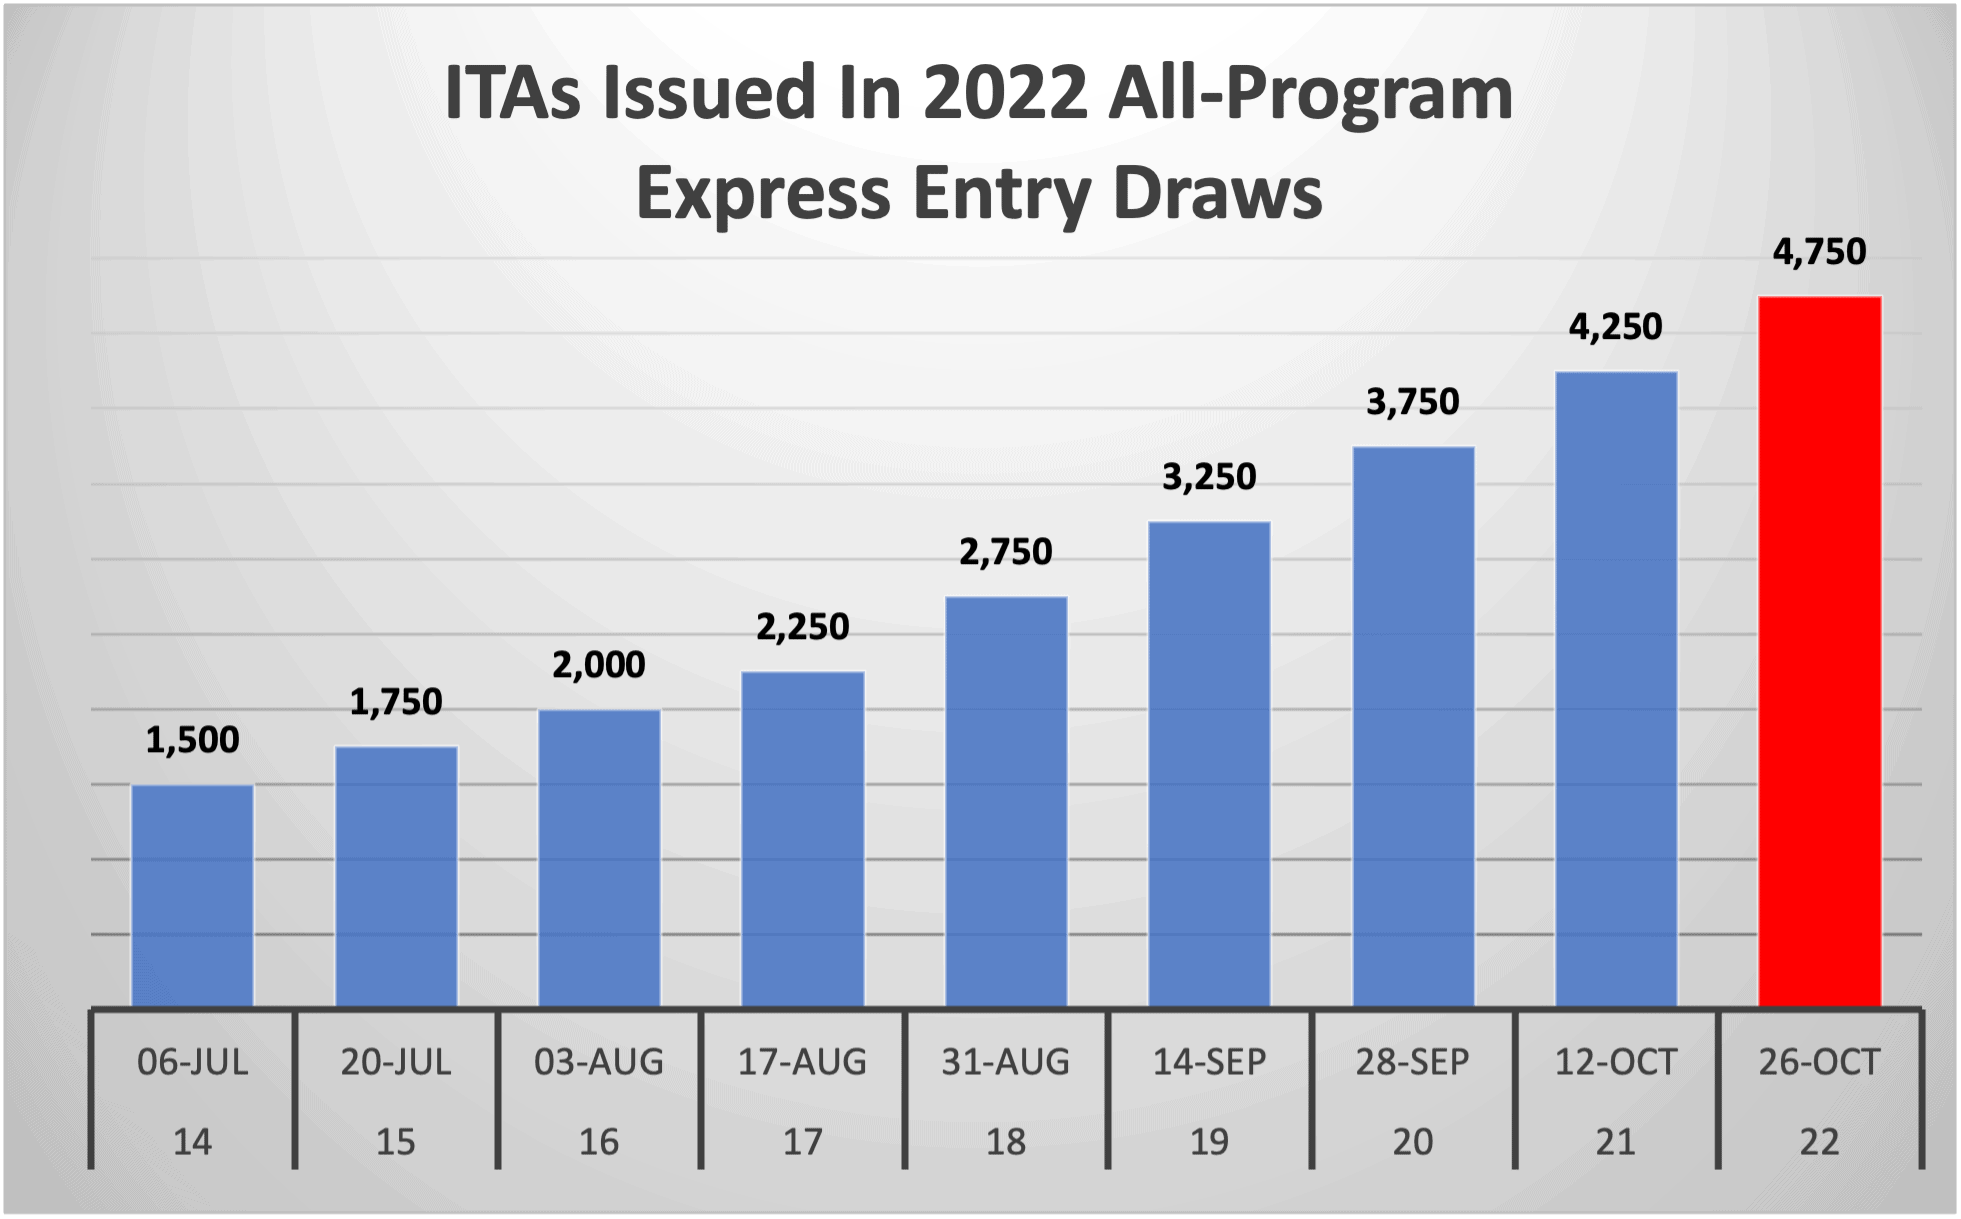 ITAs Issued In 2022 All-Program Express Entry Draws